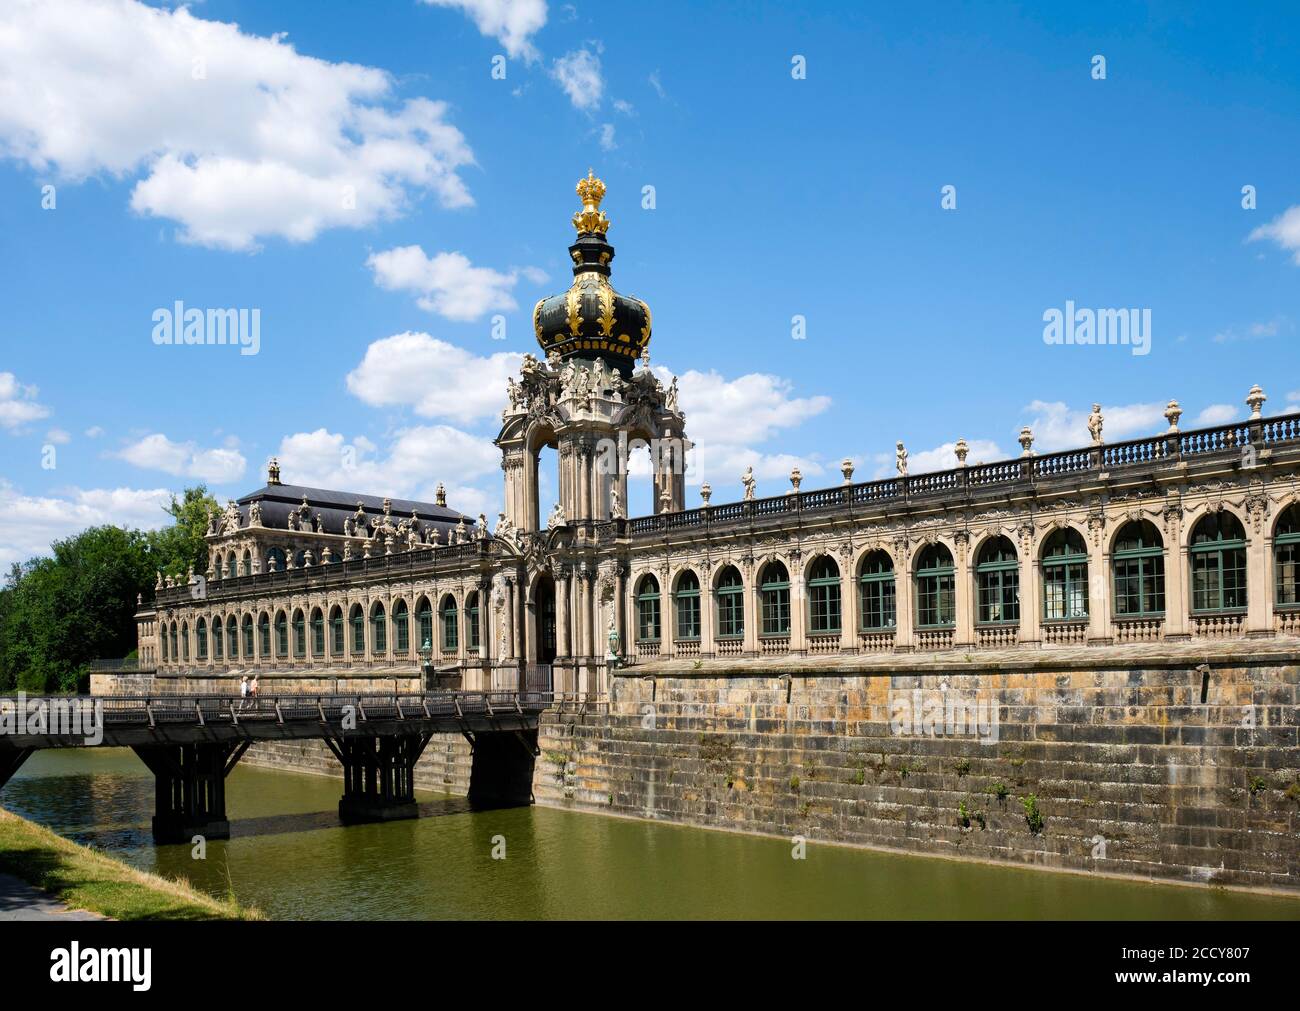 Crown gate with kennel trench and moat bridge, Zwinger, Dresden, Saxony, Germany Stock Photo